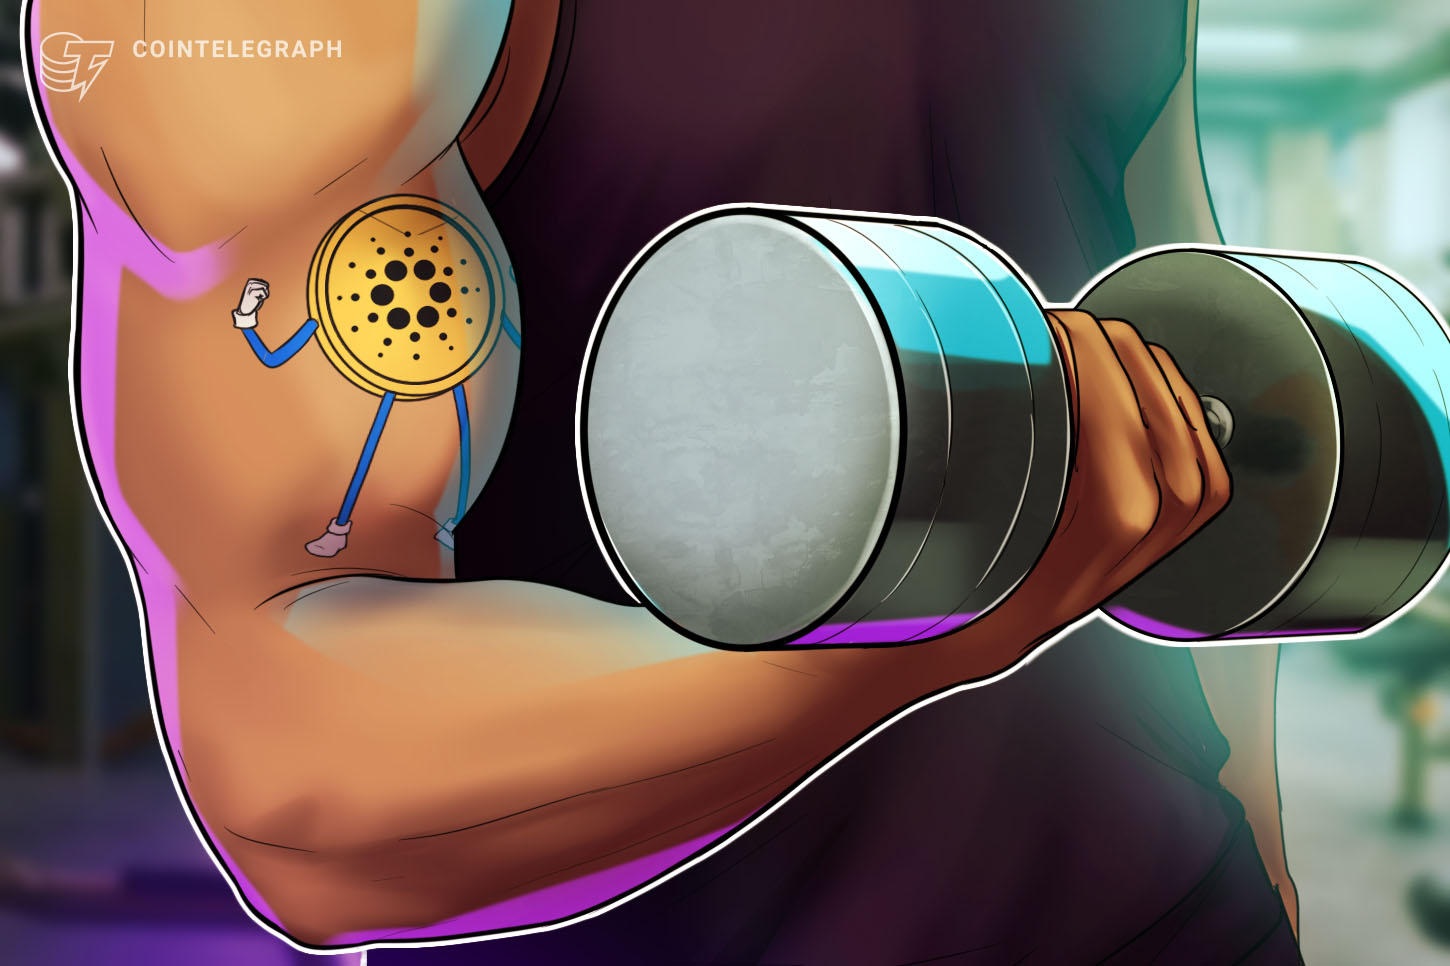 Cardano ‘Dwarfs’ Tezos After Shelley Onerous Fork, Says Safety Auditor